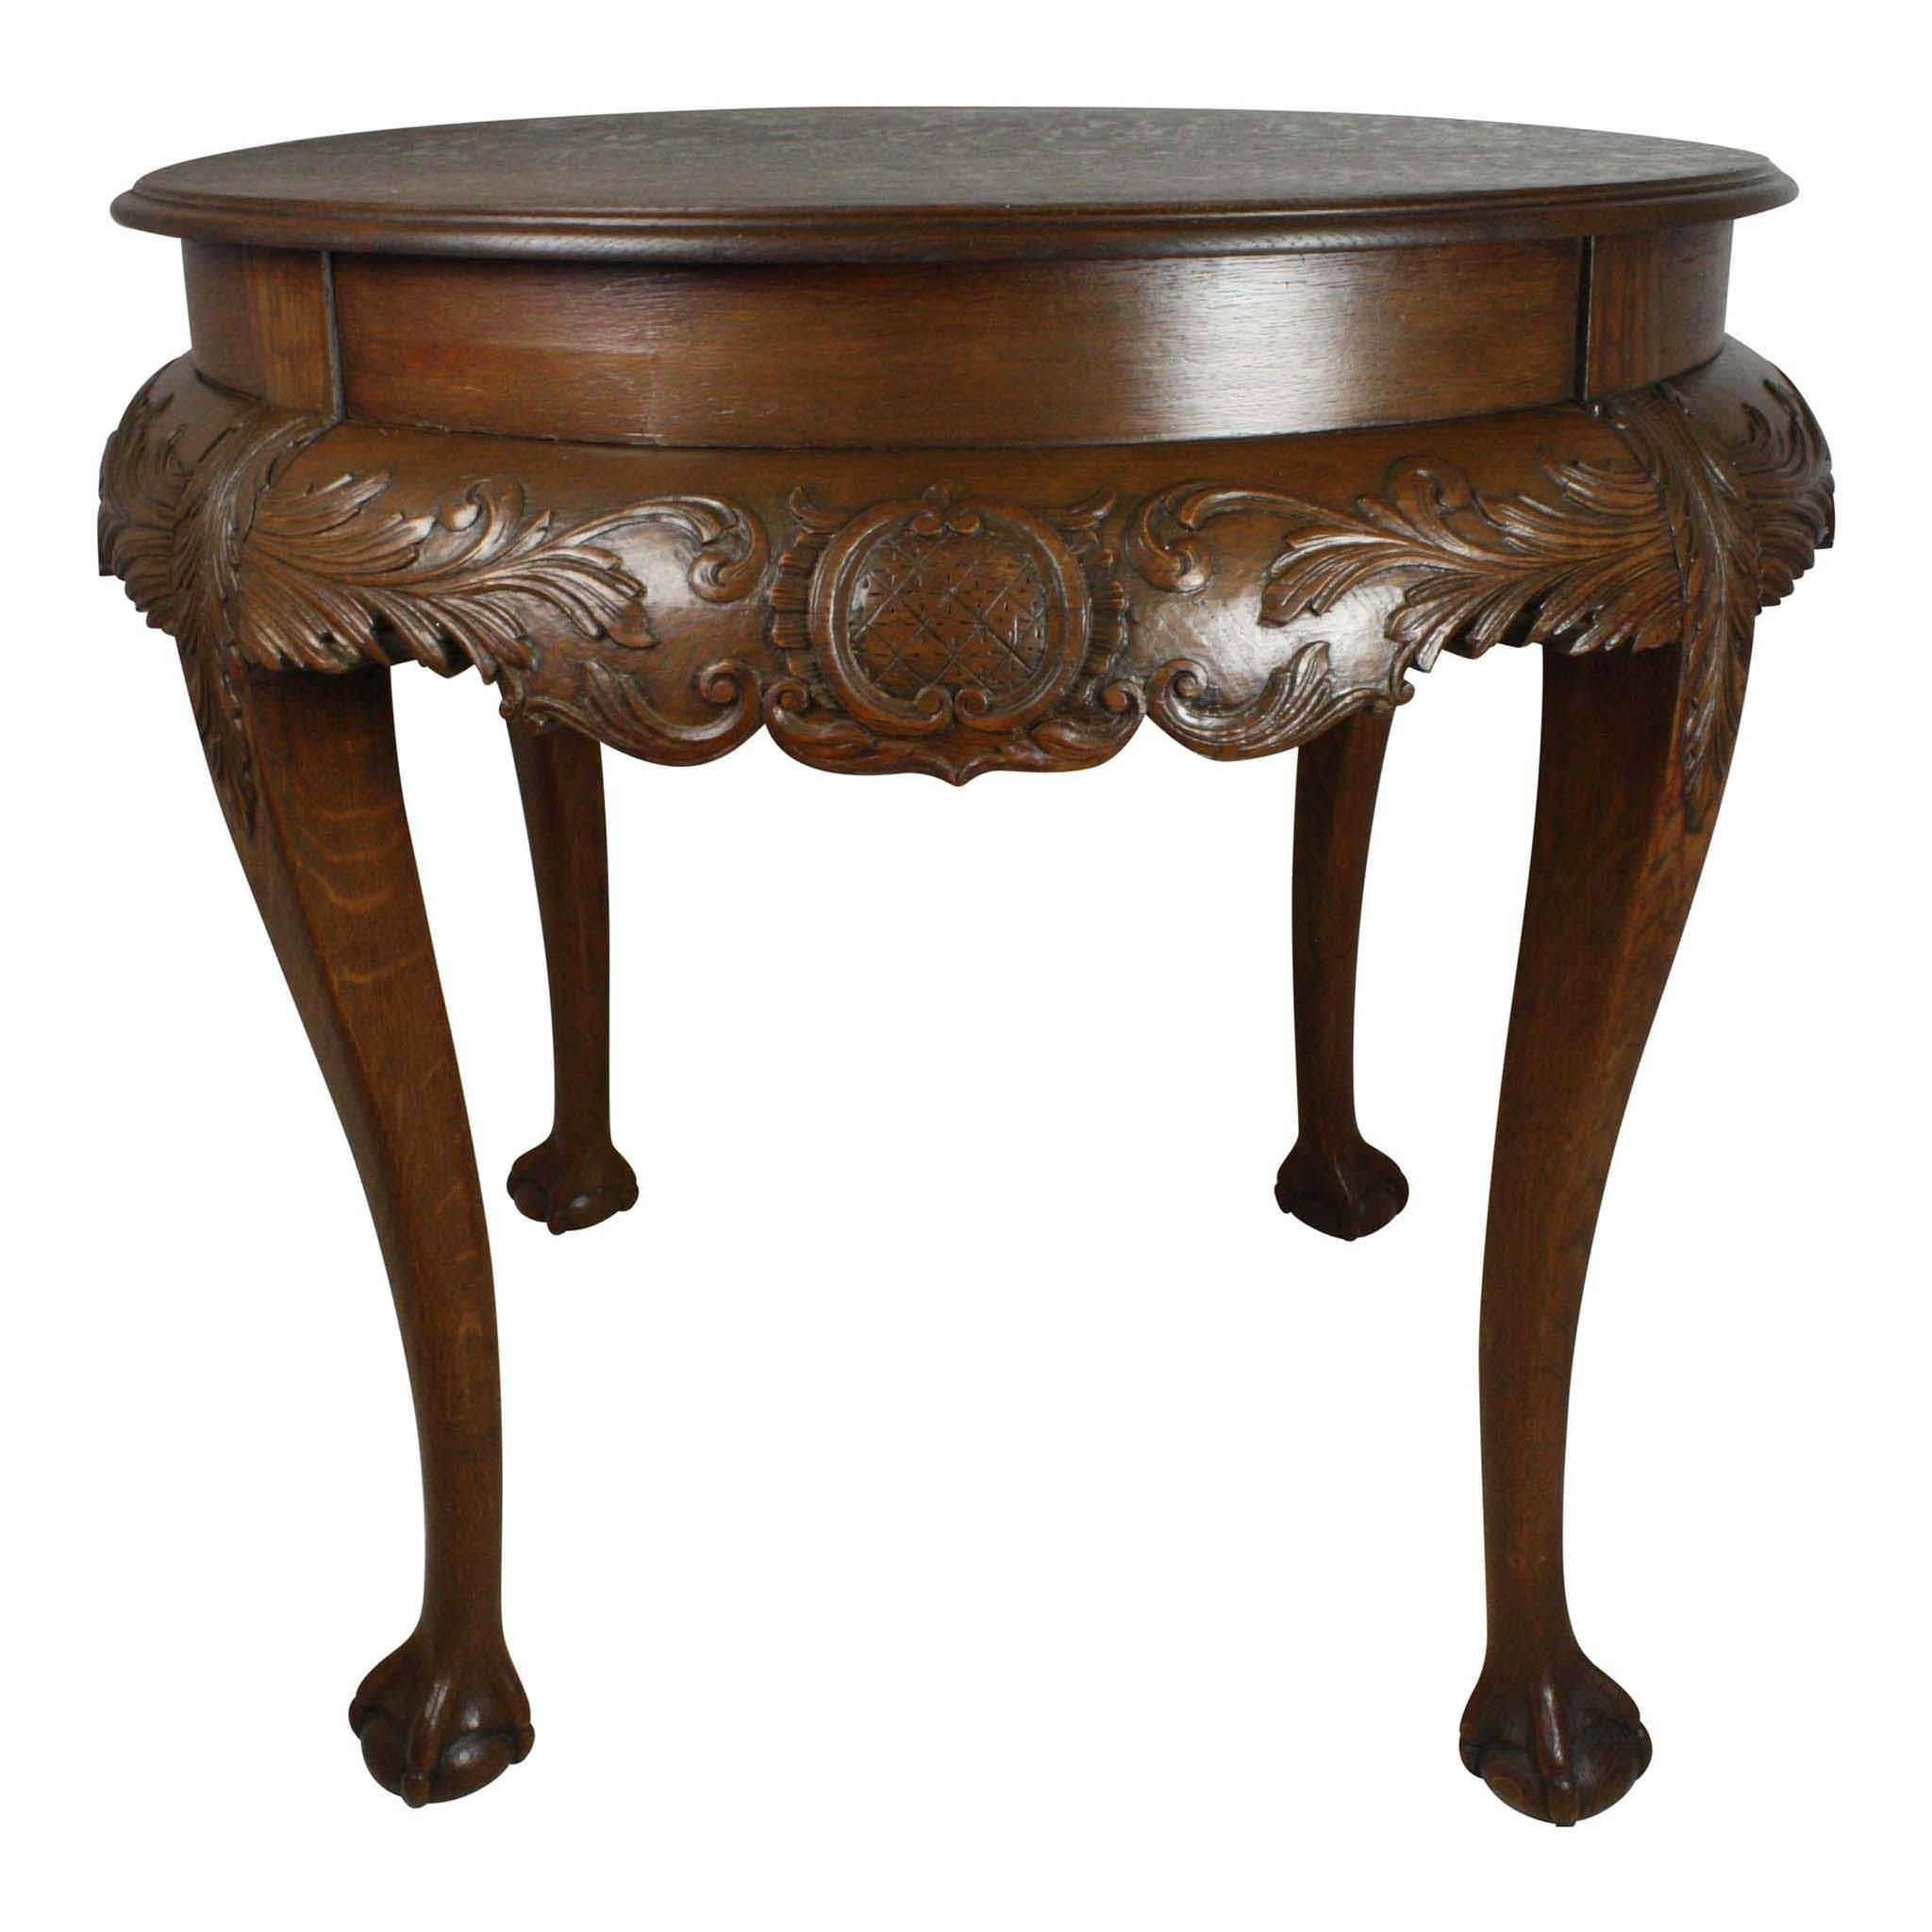 The skirt and legs are beautifully done in their own right, but where this piece stands out is the quarter sawn oak used for the tabletop. The consistency of the flecking is exceptional. Queen Anne legs are carved with acanthus leaves and ball and